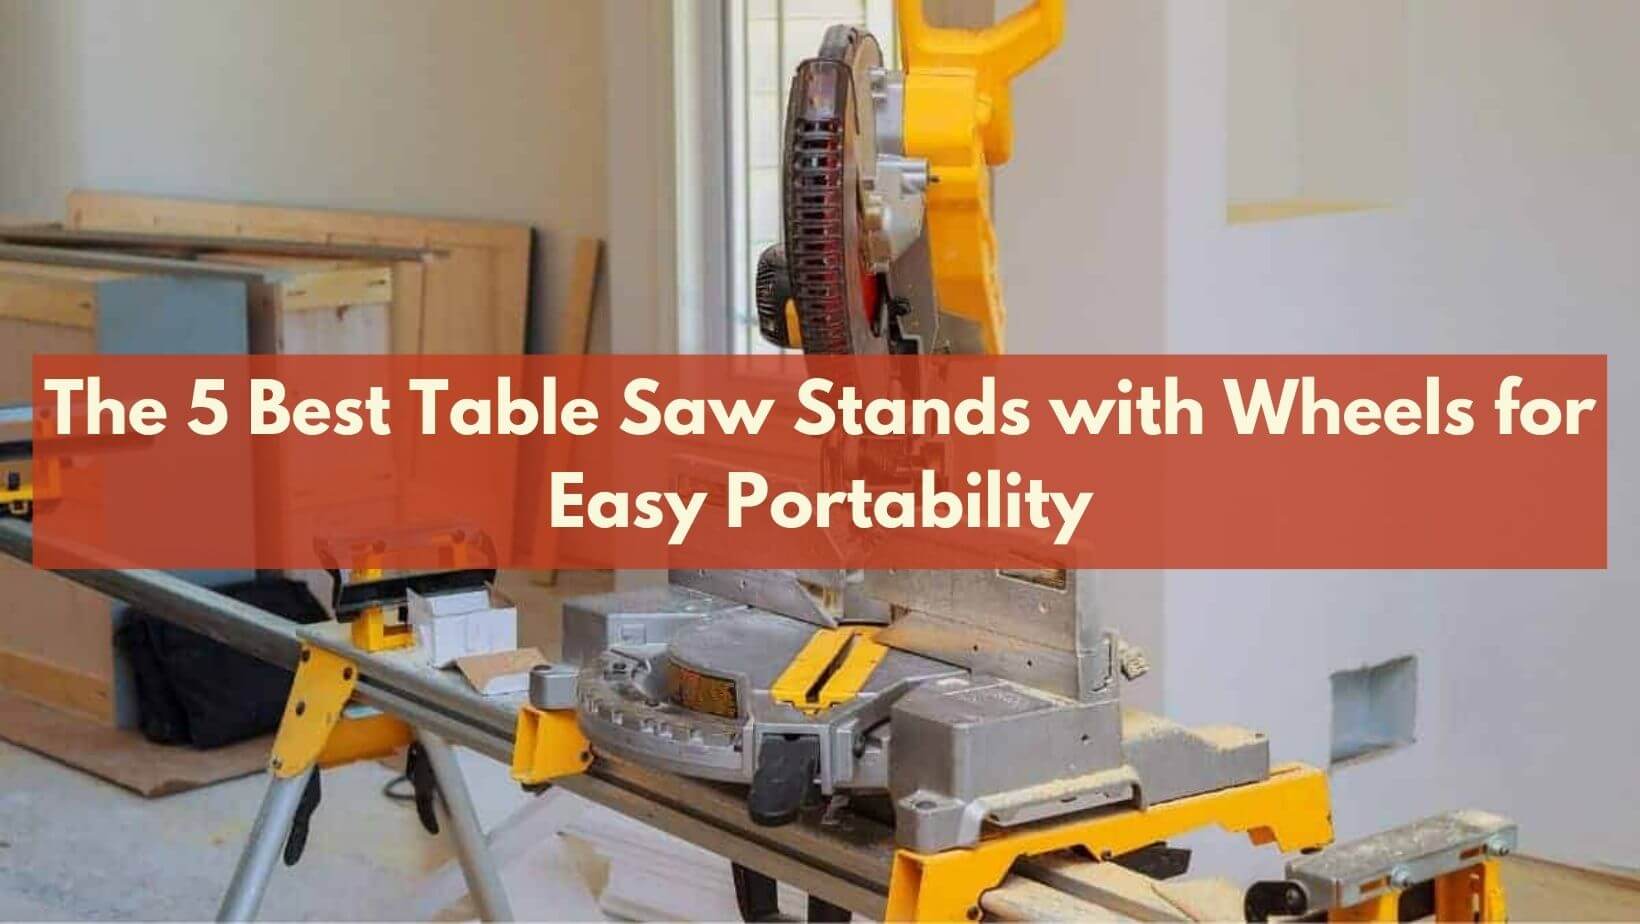 Best Table Saw Stands with Wheels